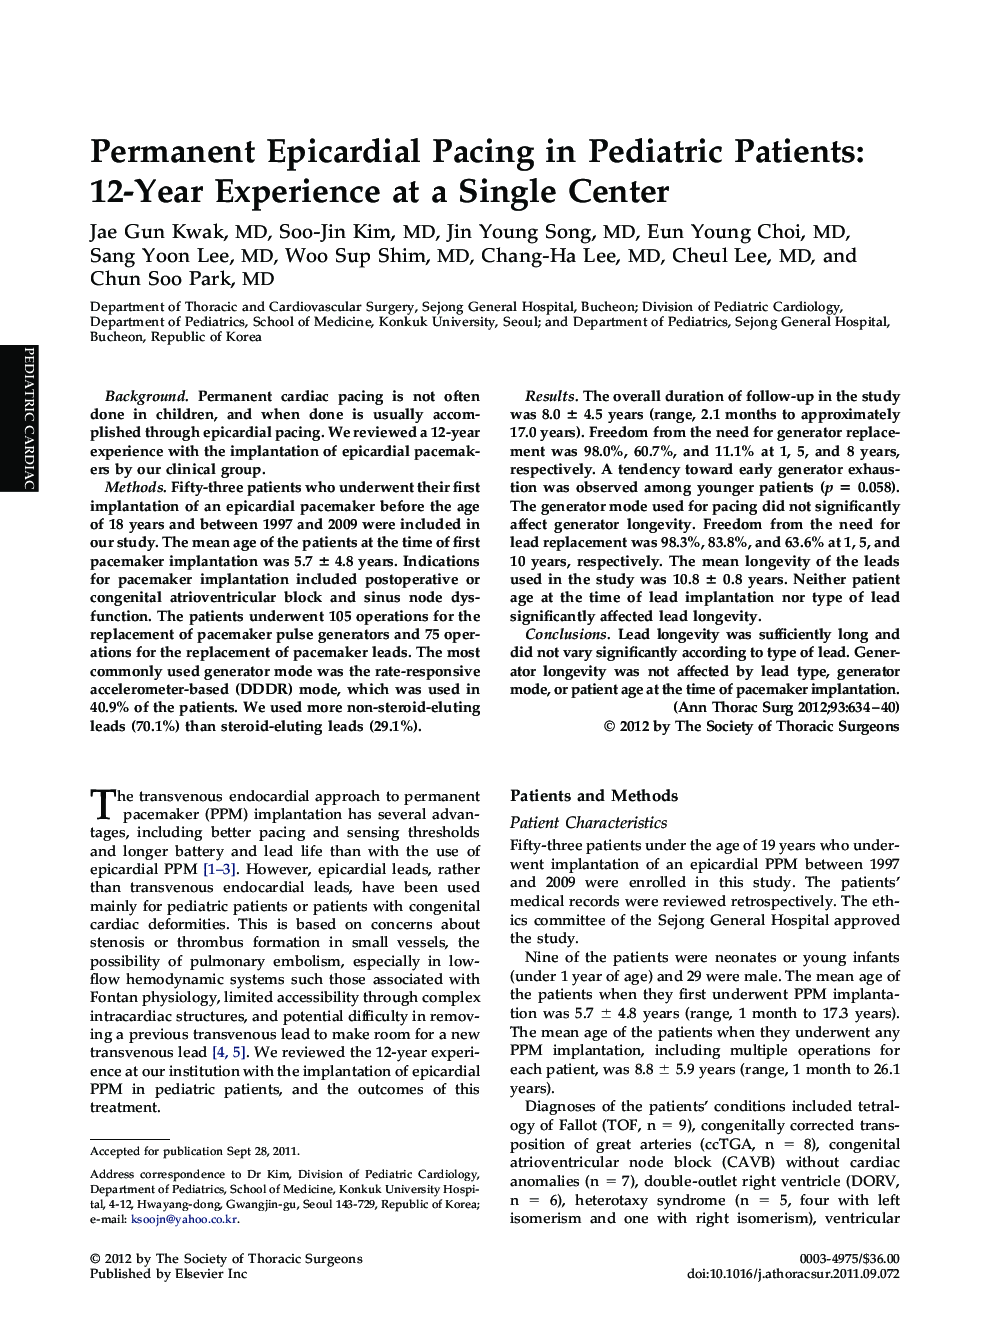 Permanent Epicardial Pacing in Pediatric Patients: 12-Year Experience at a Single Center